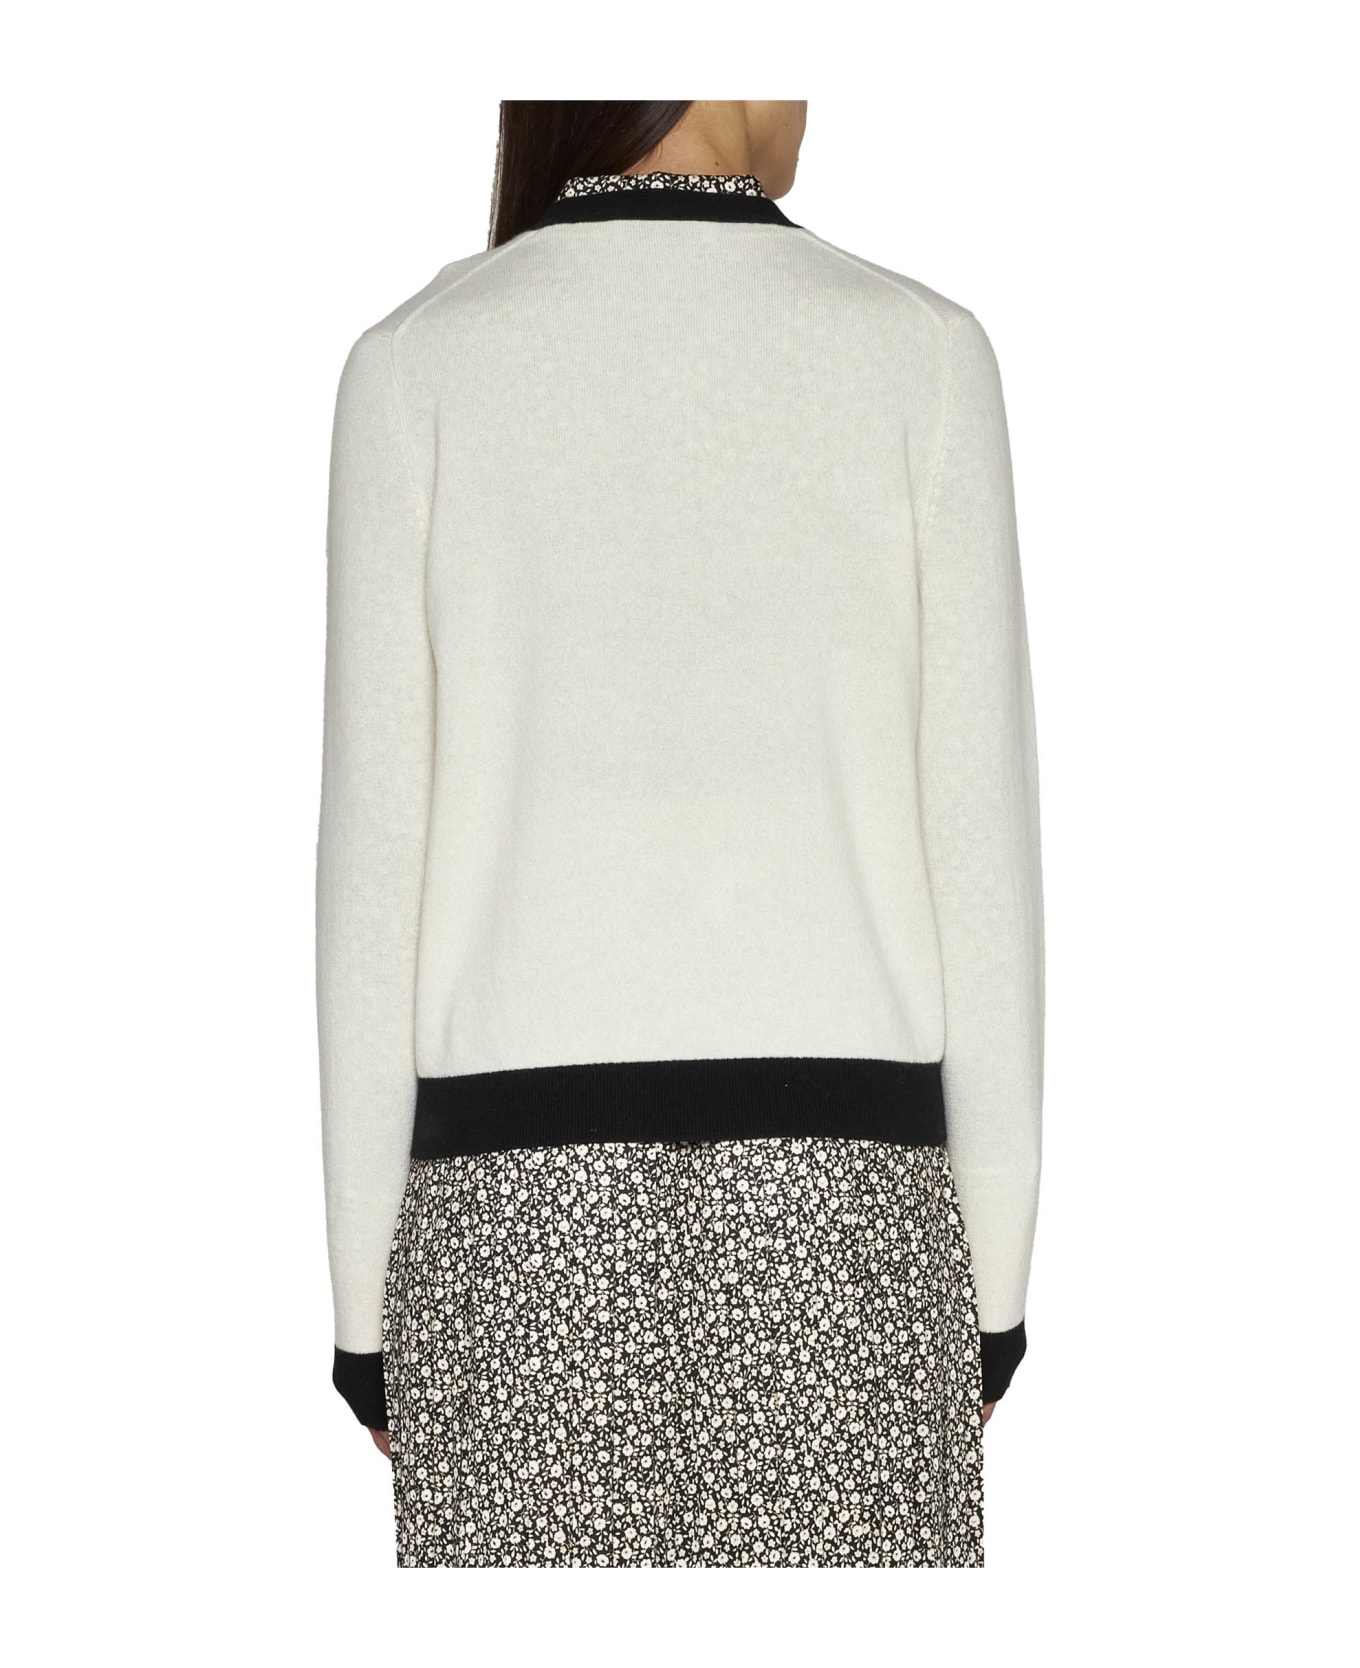 Tory Burch Cardigan With Contrasting Finish - Soft ivory black